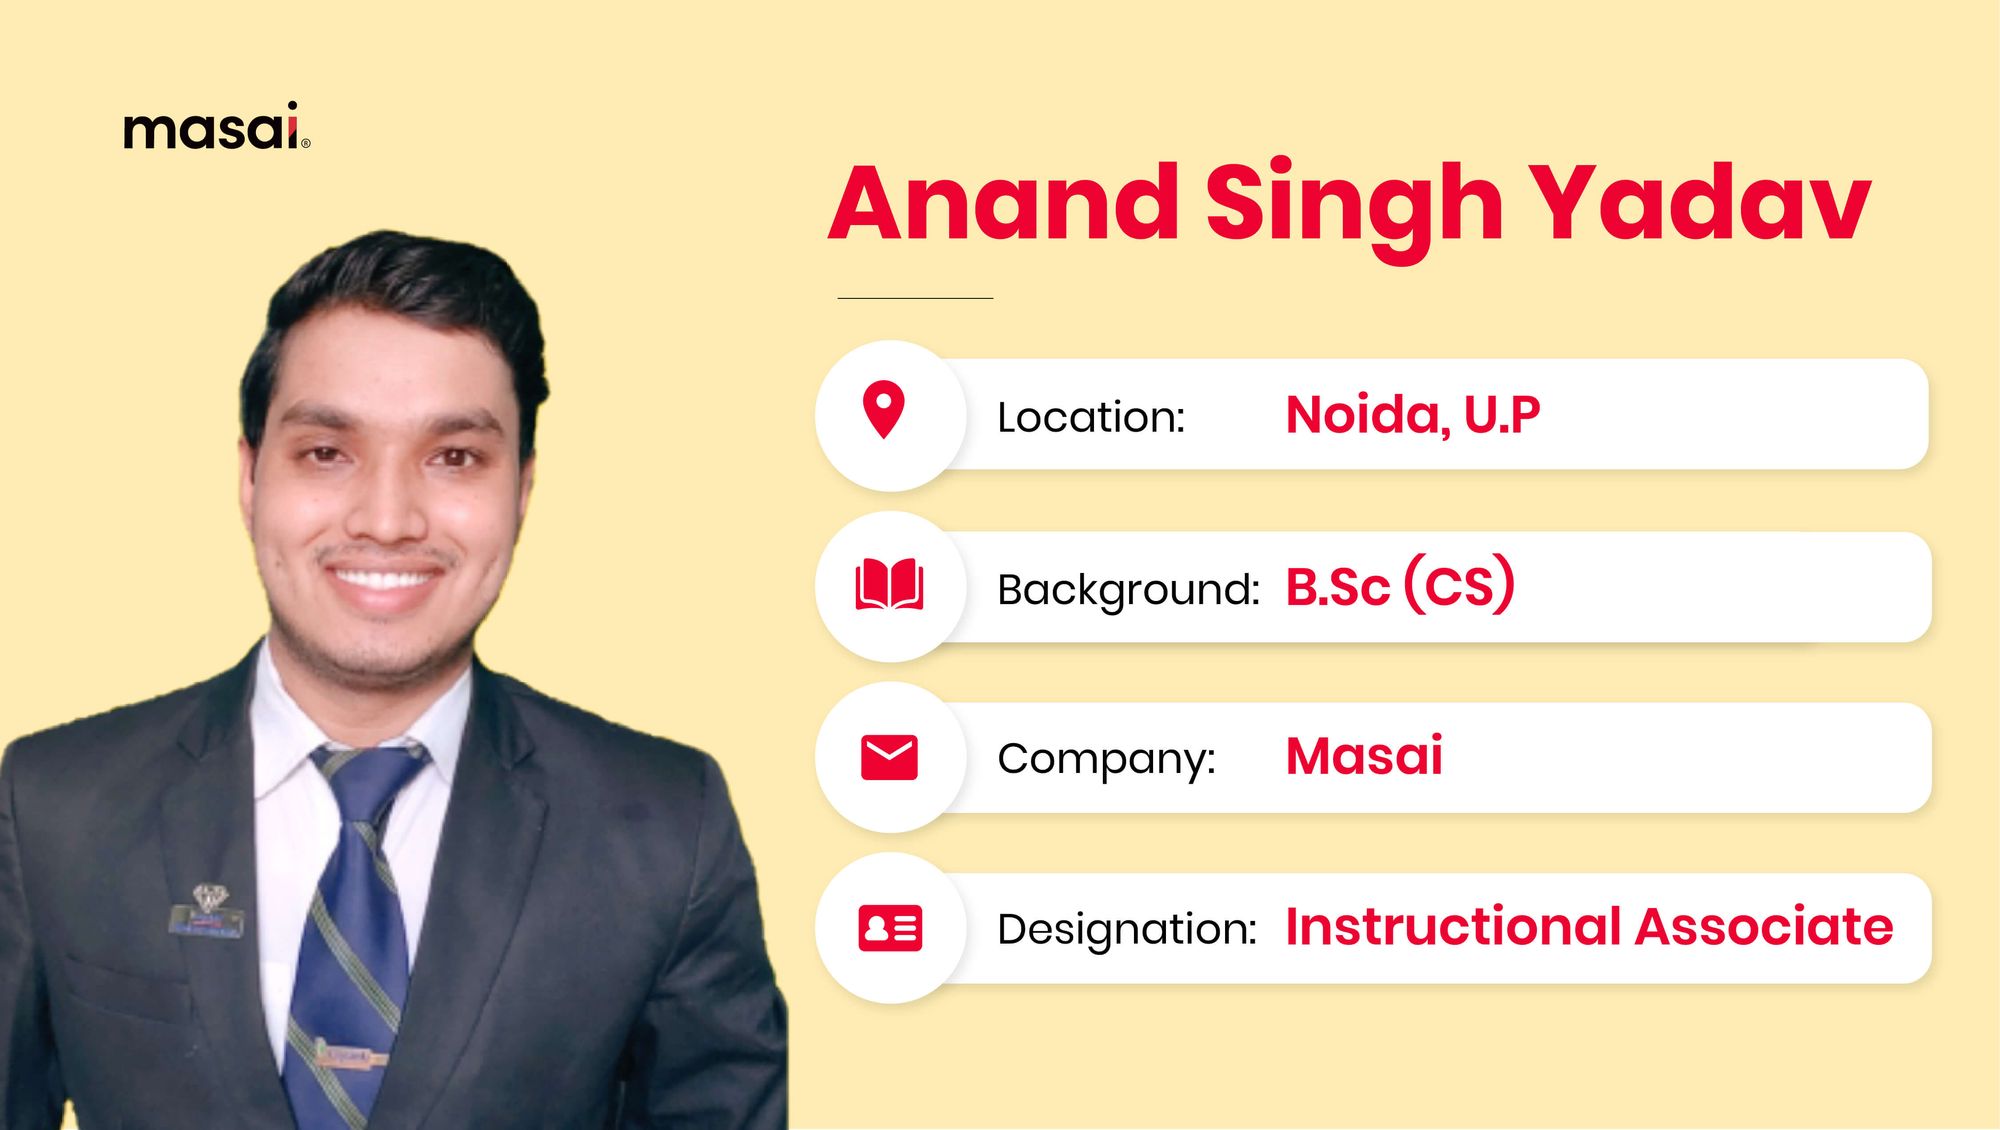 Anand Singh Yadav now working as an Instructional Associate at Masai